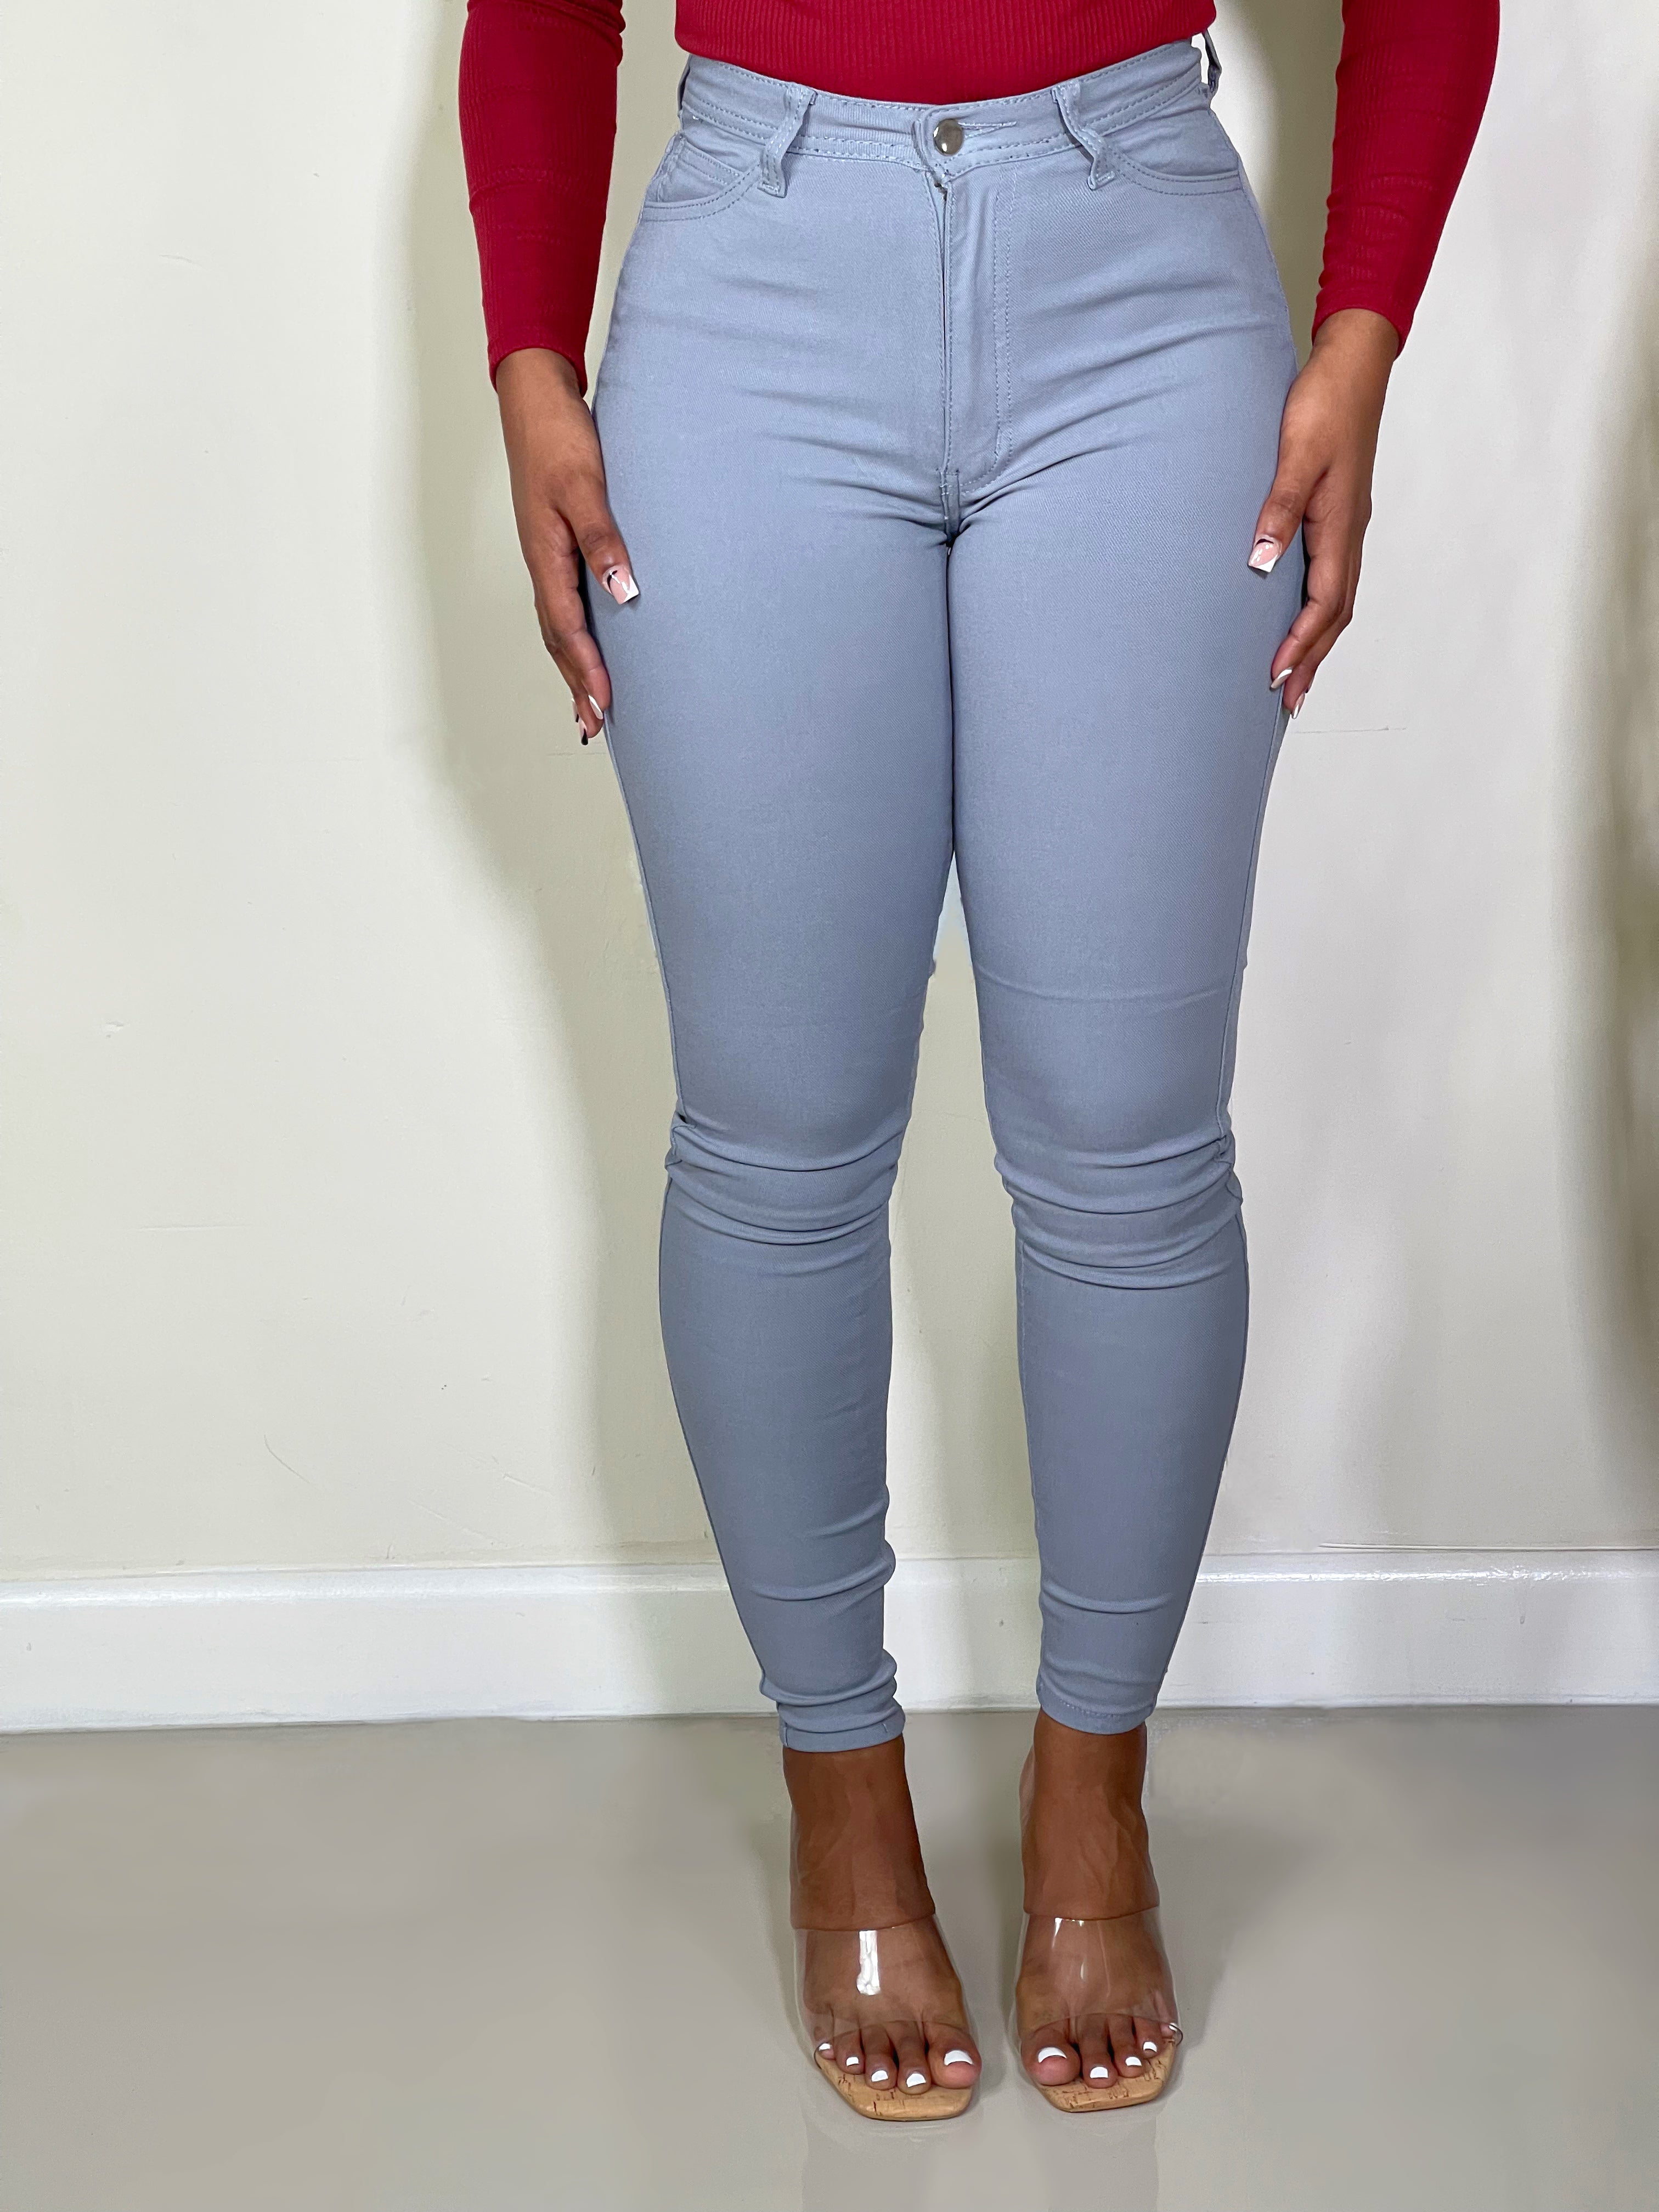 Classic Girl High Rise Skinny Jeans-Light Grey - Impoze Style™